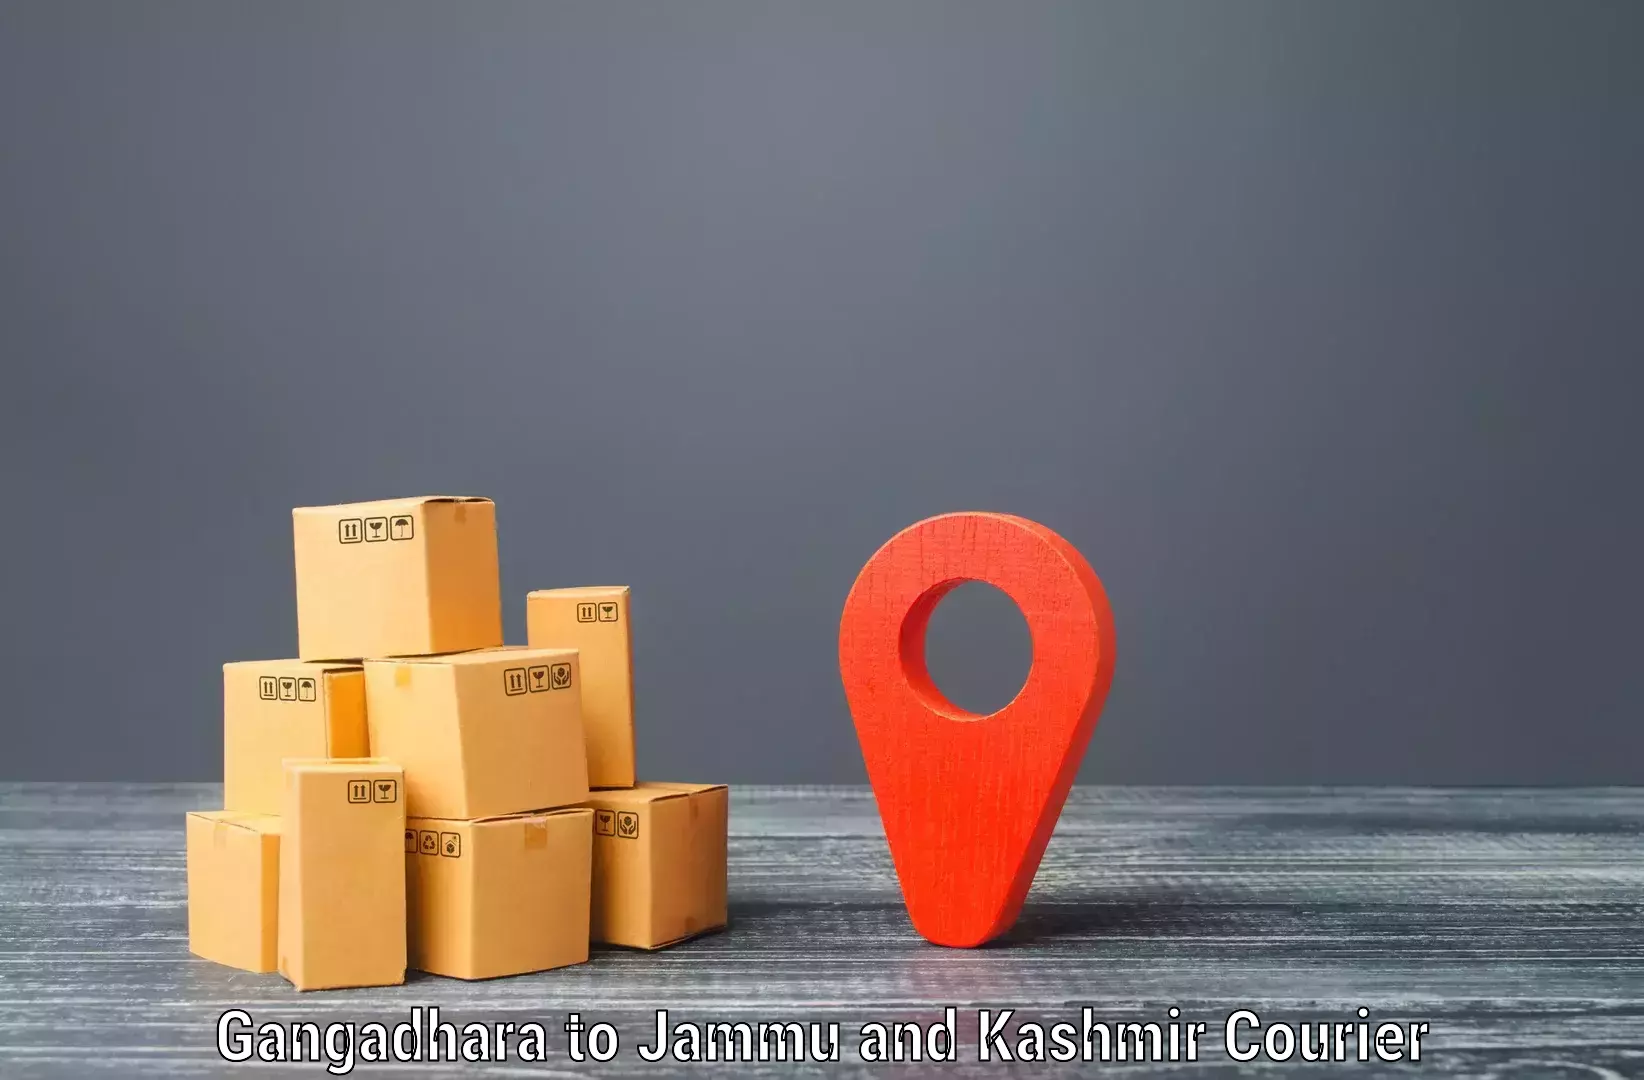 Same-day delivery solutions in Gangadhara to Kulgam